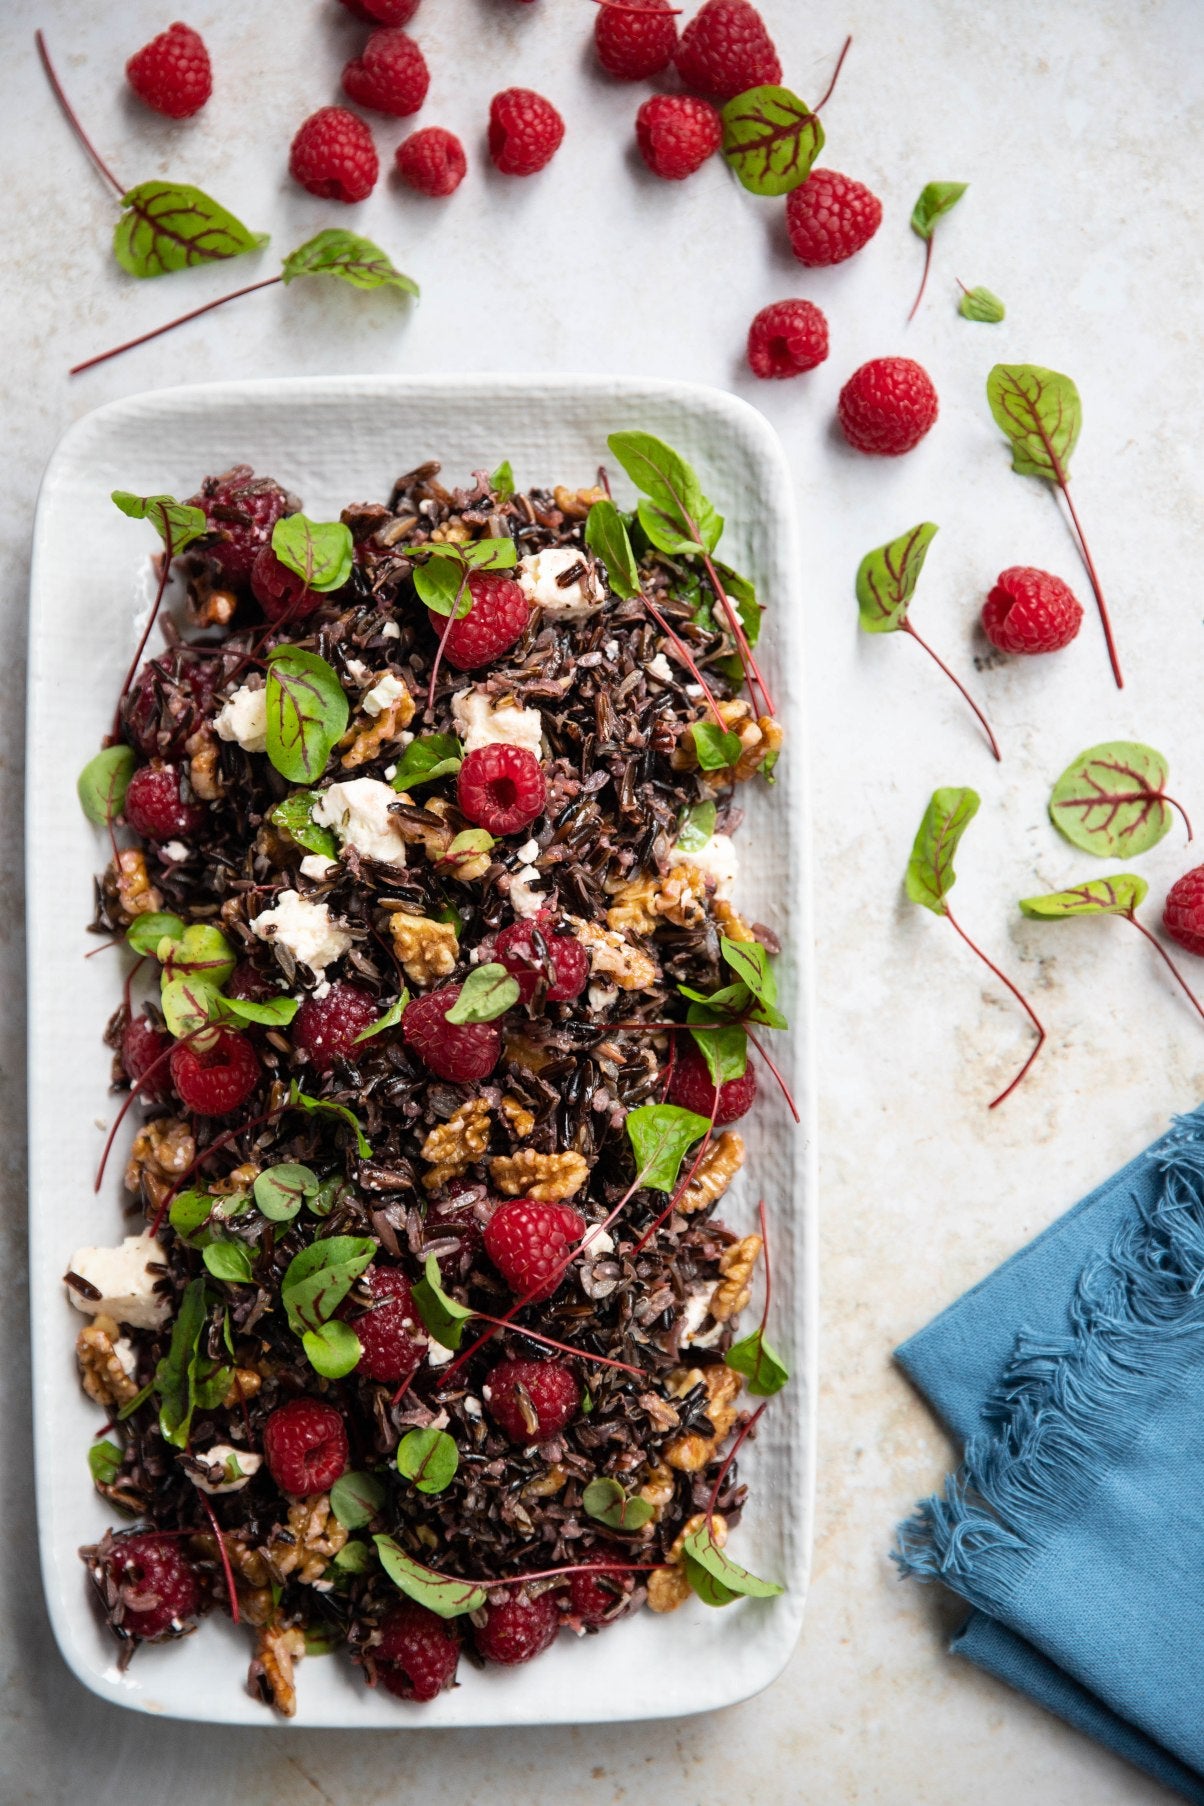 Wild Rice and Raspberry Salad with Toasted Walnuts, Feta and Raspberry Dressing | Harris Farm Markets 